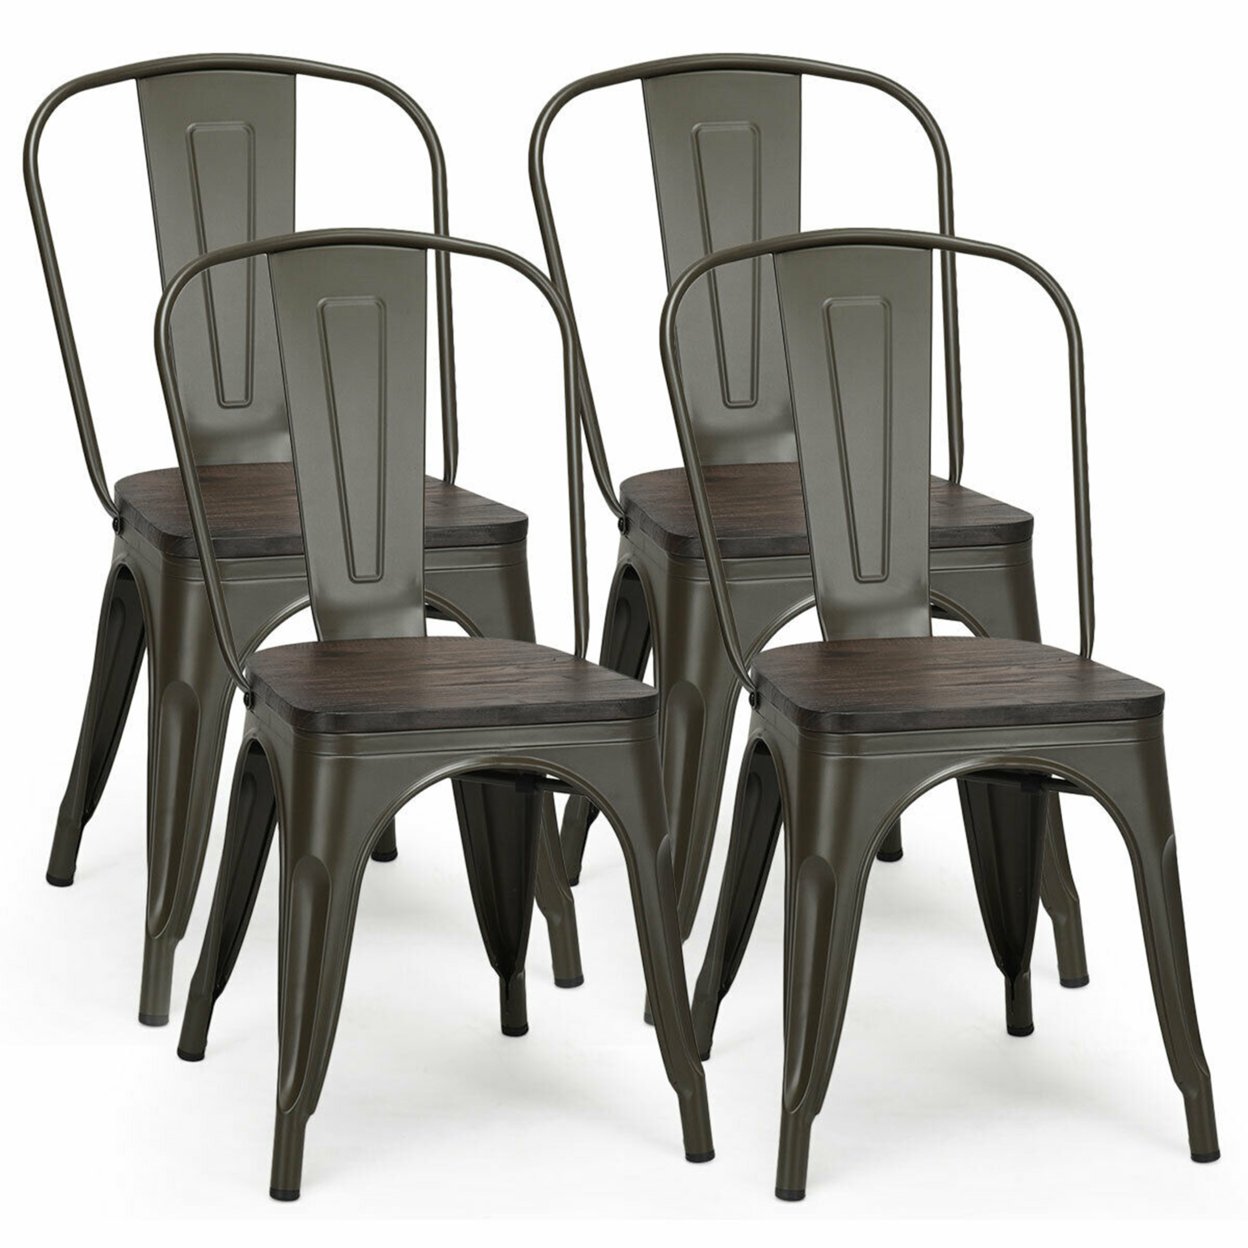 Set Of 4 Metal Dining Side Chair Wood Seat Stackable Bistro Cafe Gun